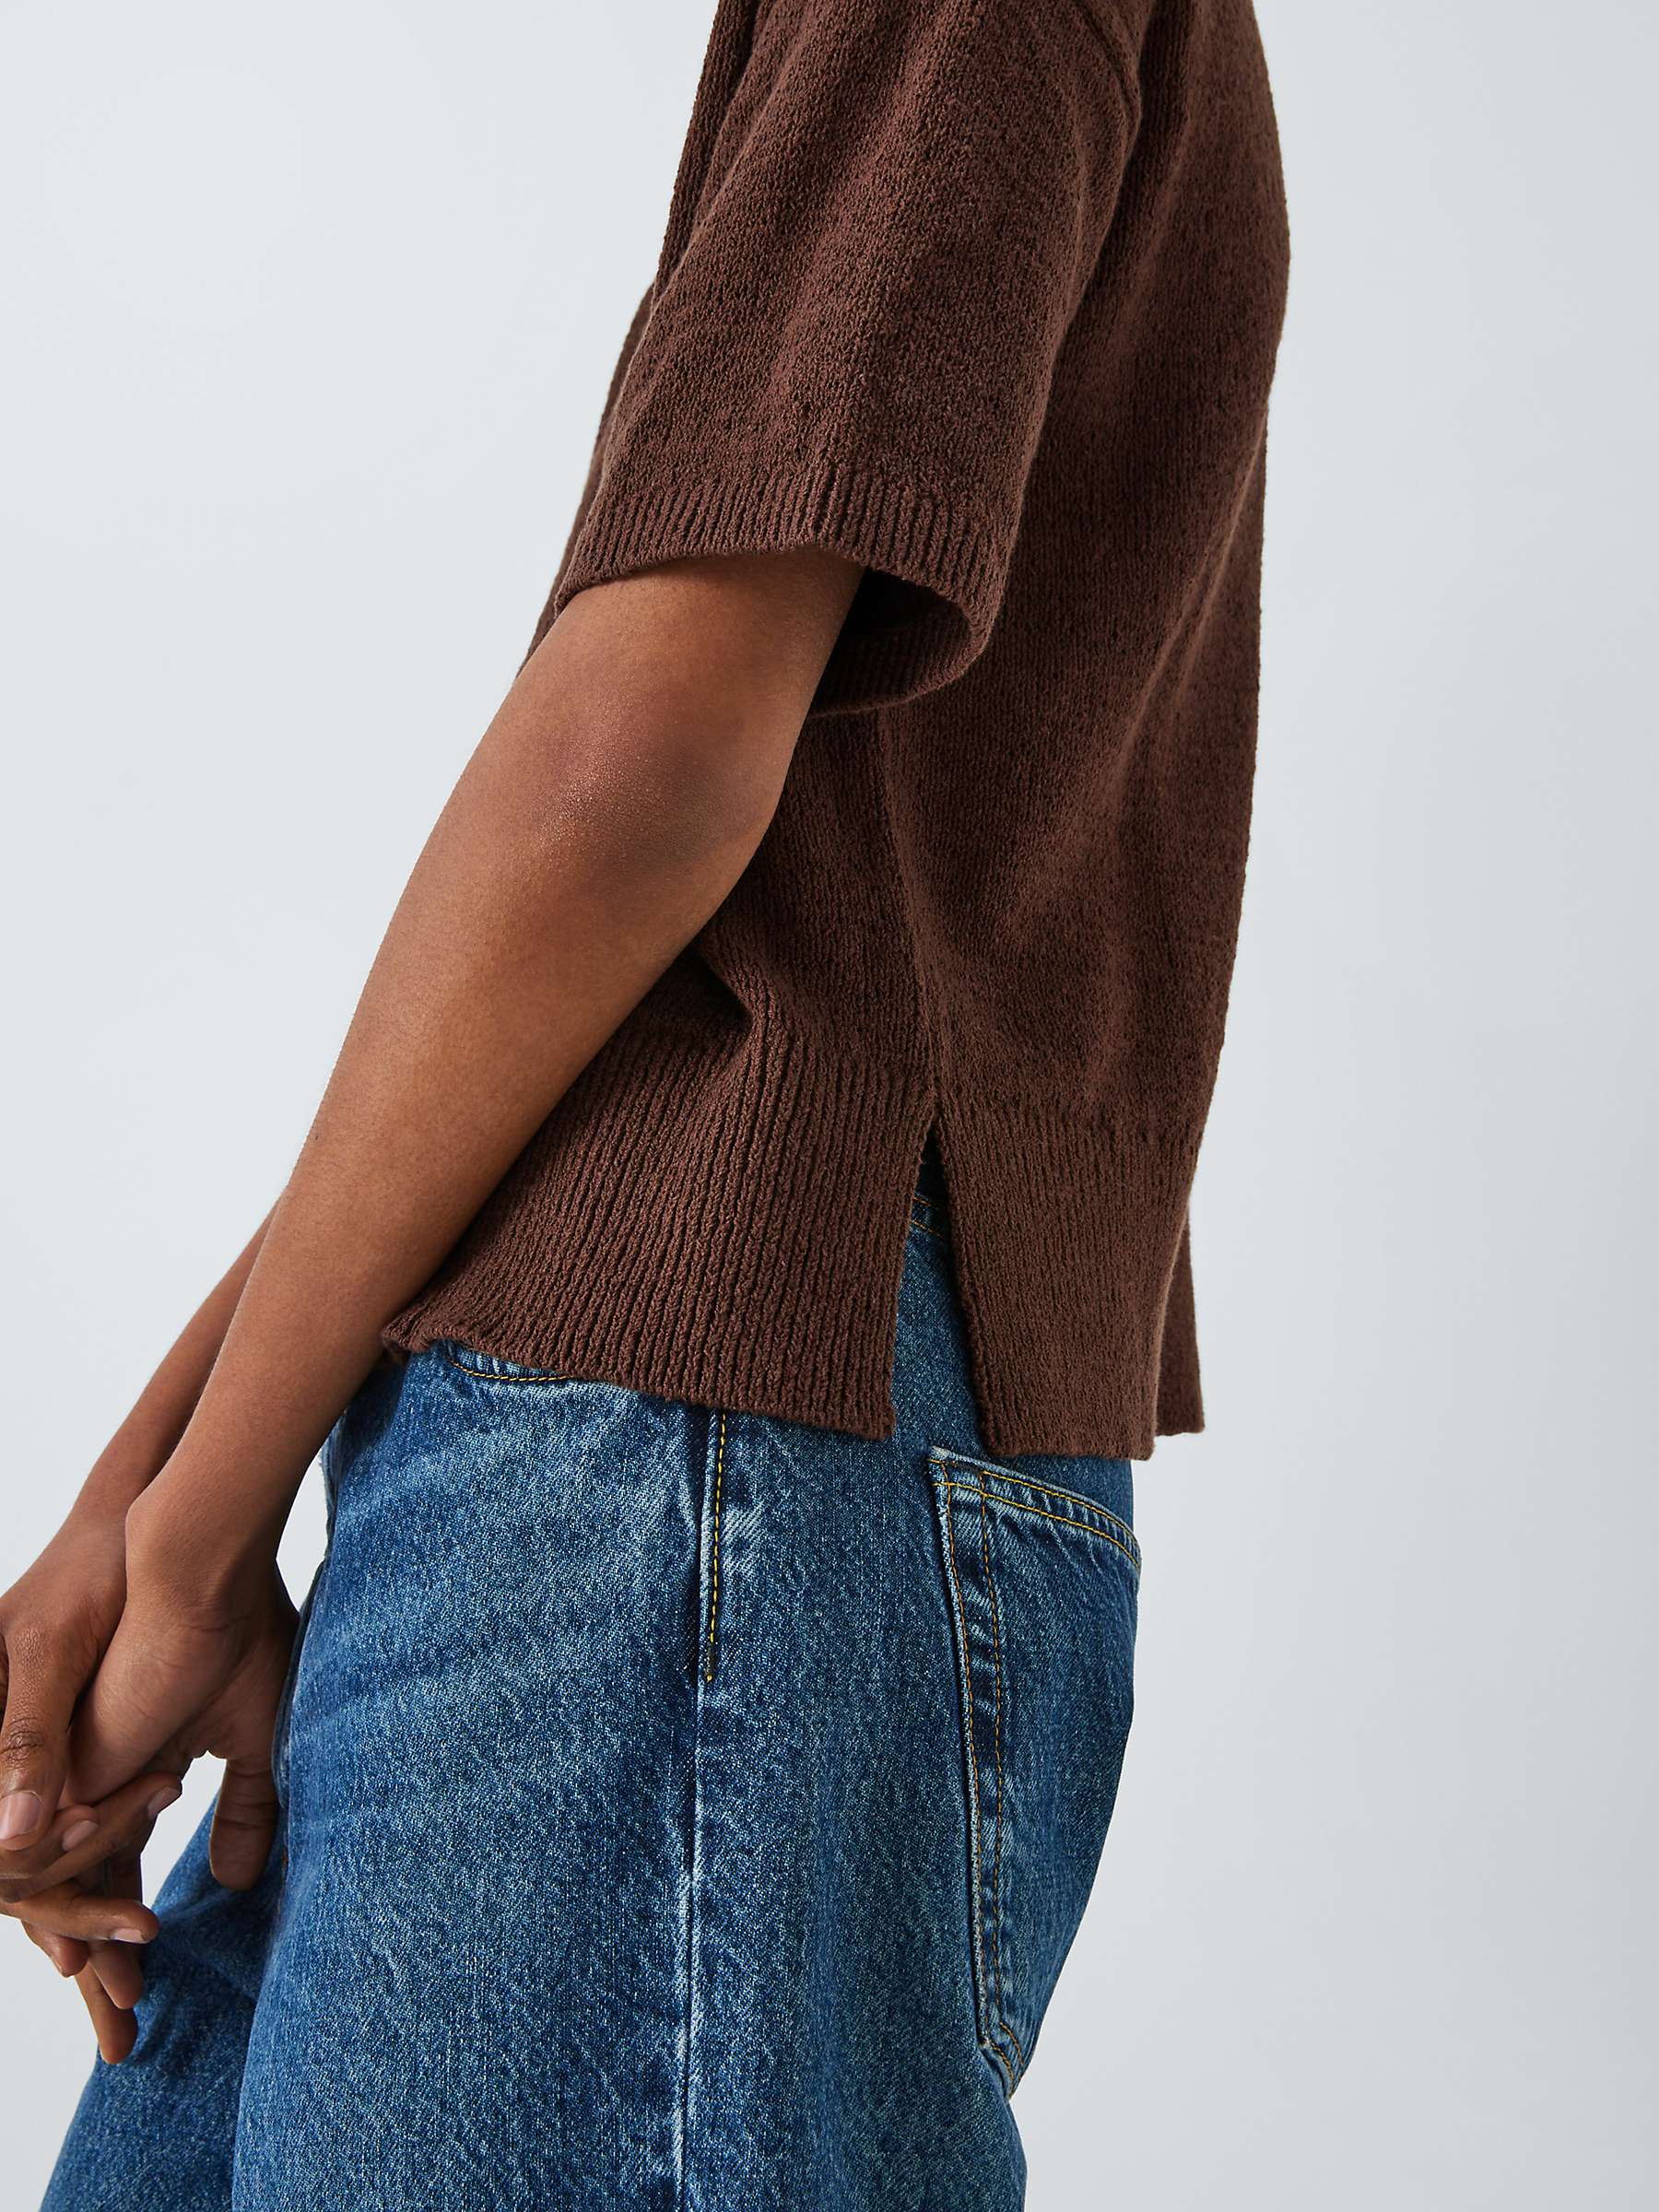 Buy John Lewis ANYDAY Knitted T-Shirt Top, Brown Online at johnlewis.com